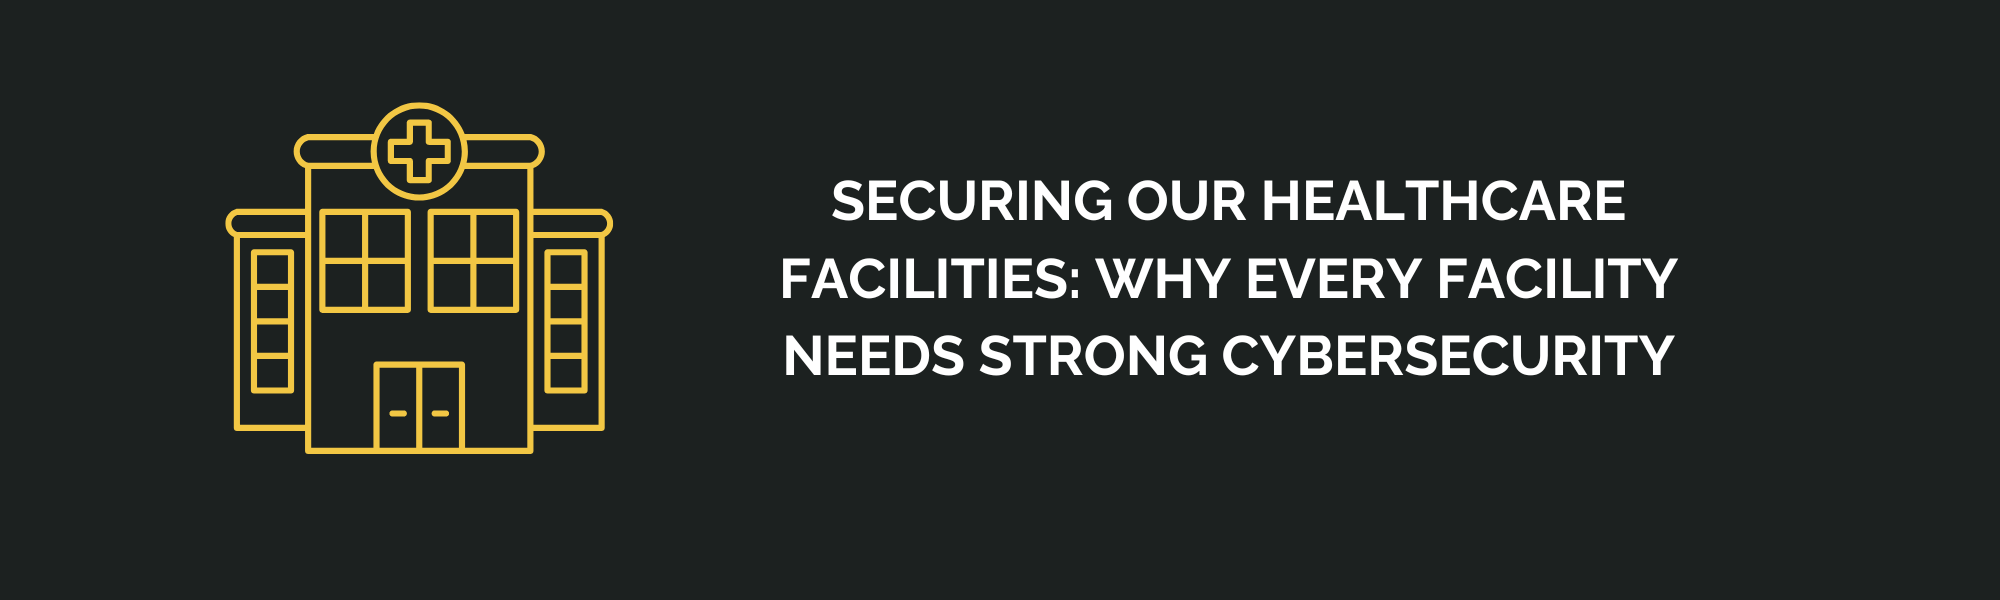 Securing Our Healthcare Facilities: Why Every Facility Needs Strong Cybersecurity